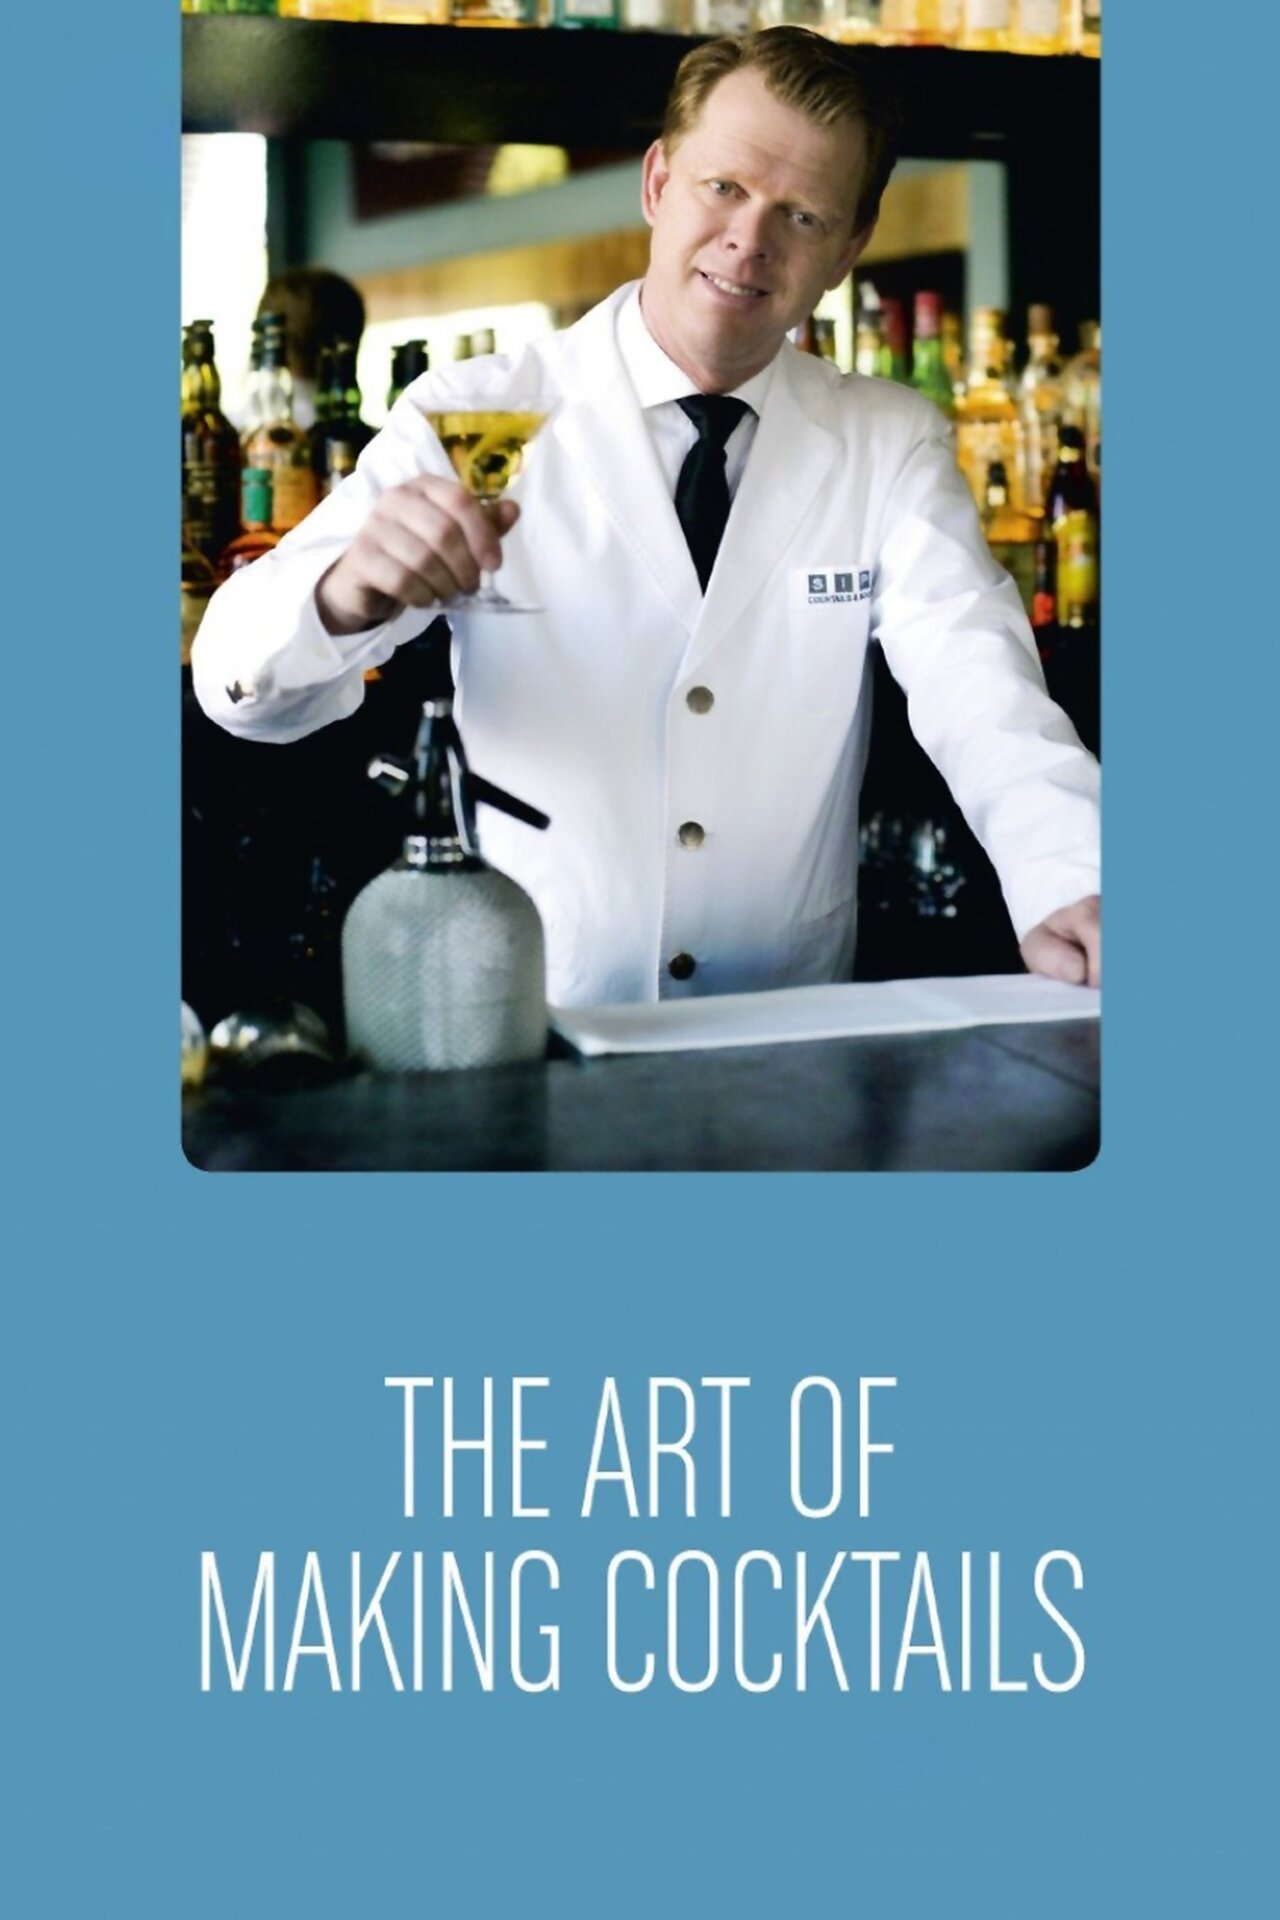 The Art of Making Cocktails